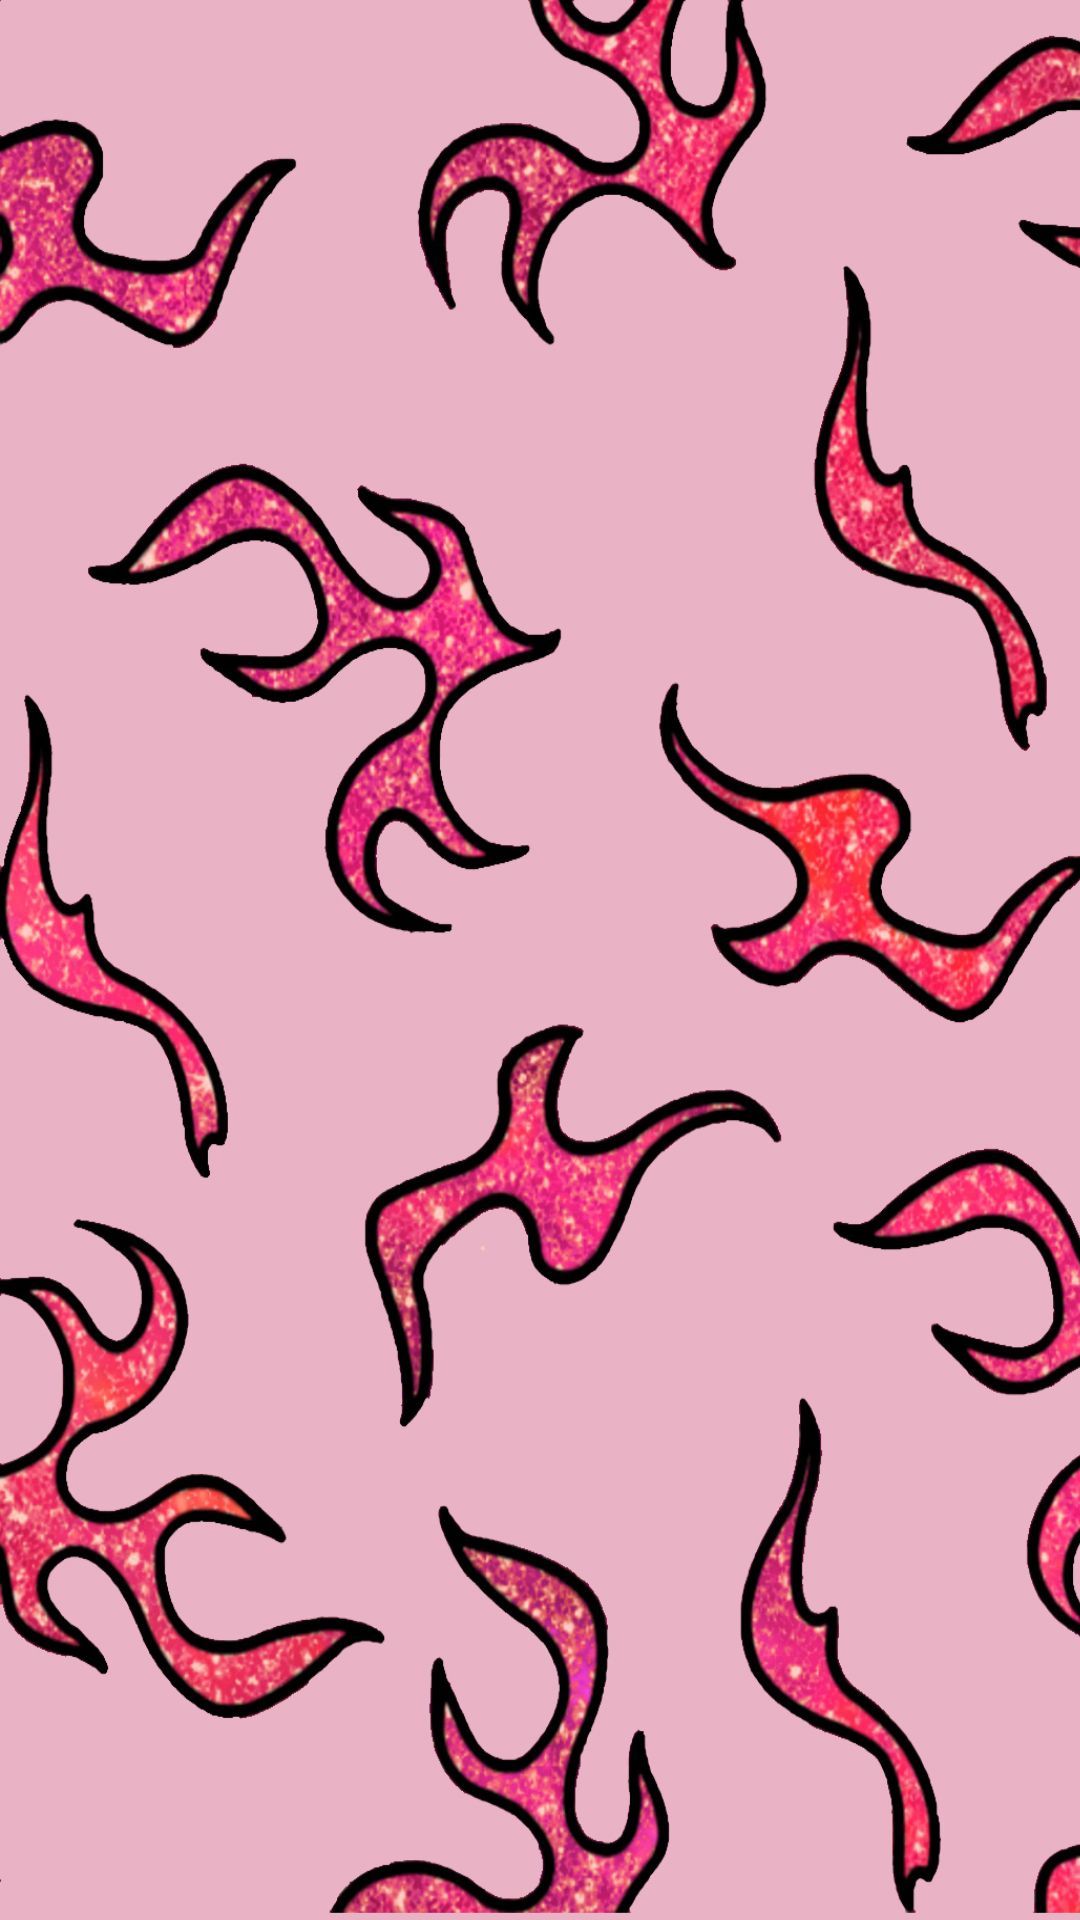 A pink and black pattern of flames on a pink background - Pink